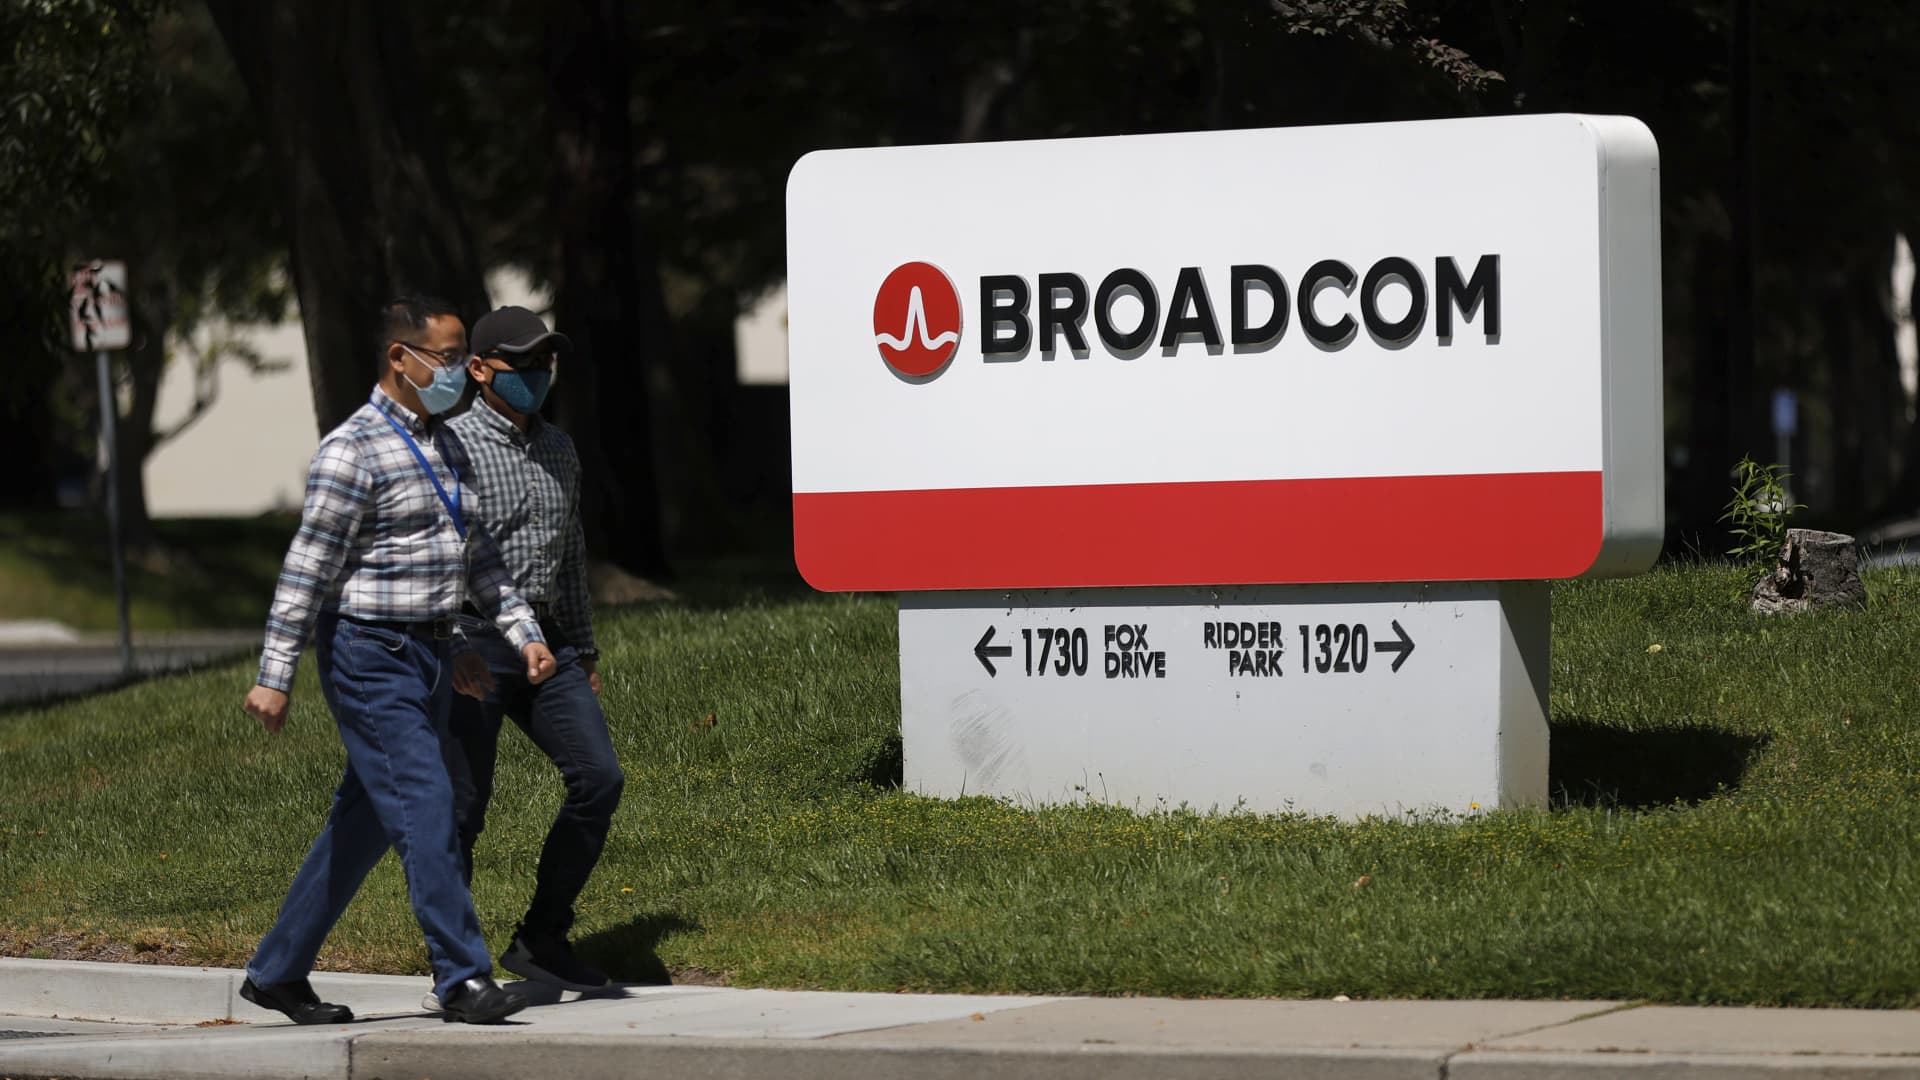 Here's why we like Broadcom so much, especially after Google shot down a damaging report - CNBC